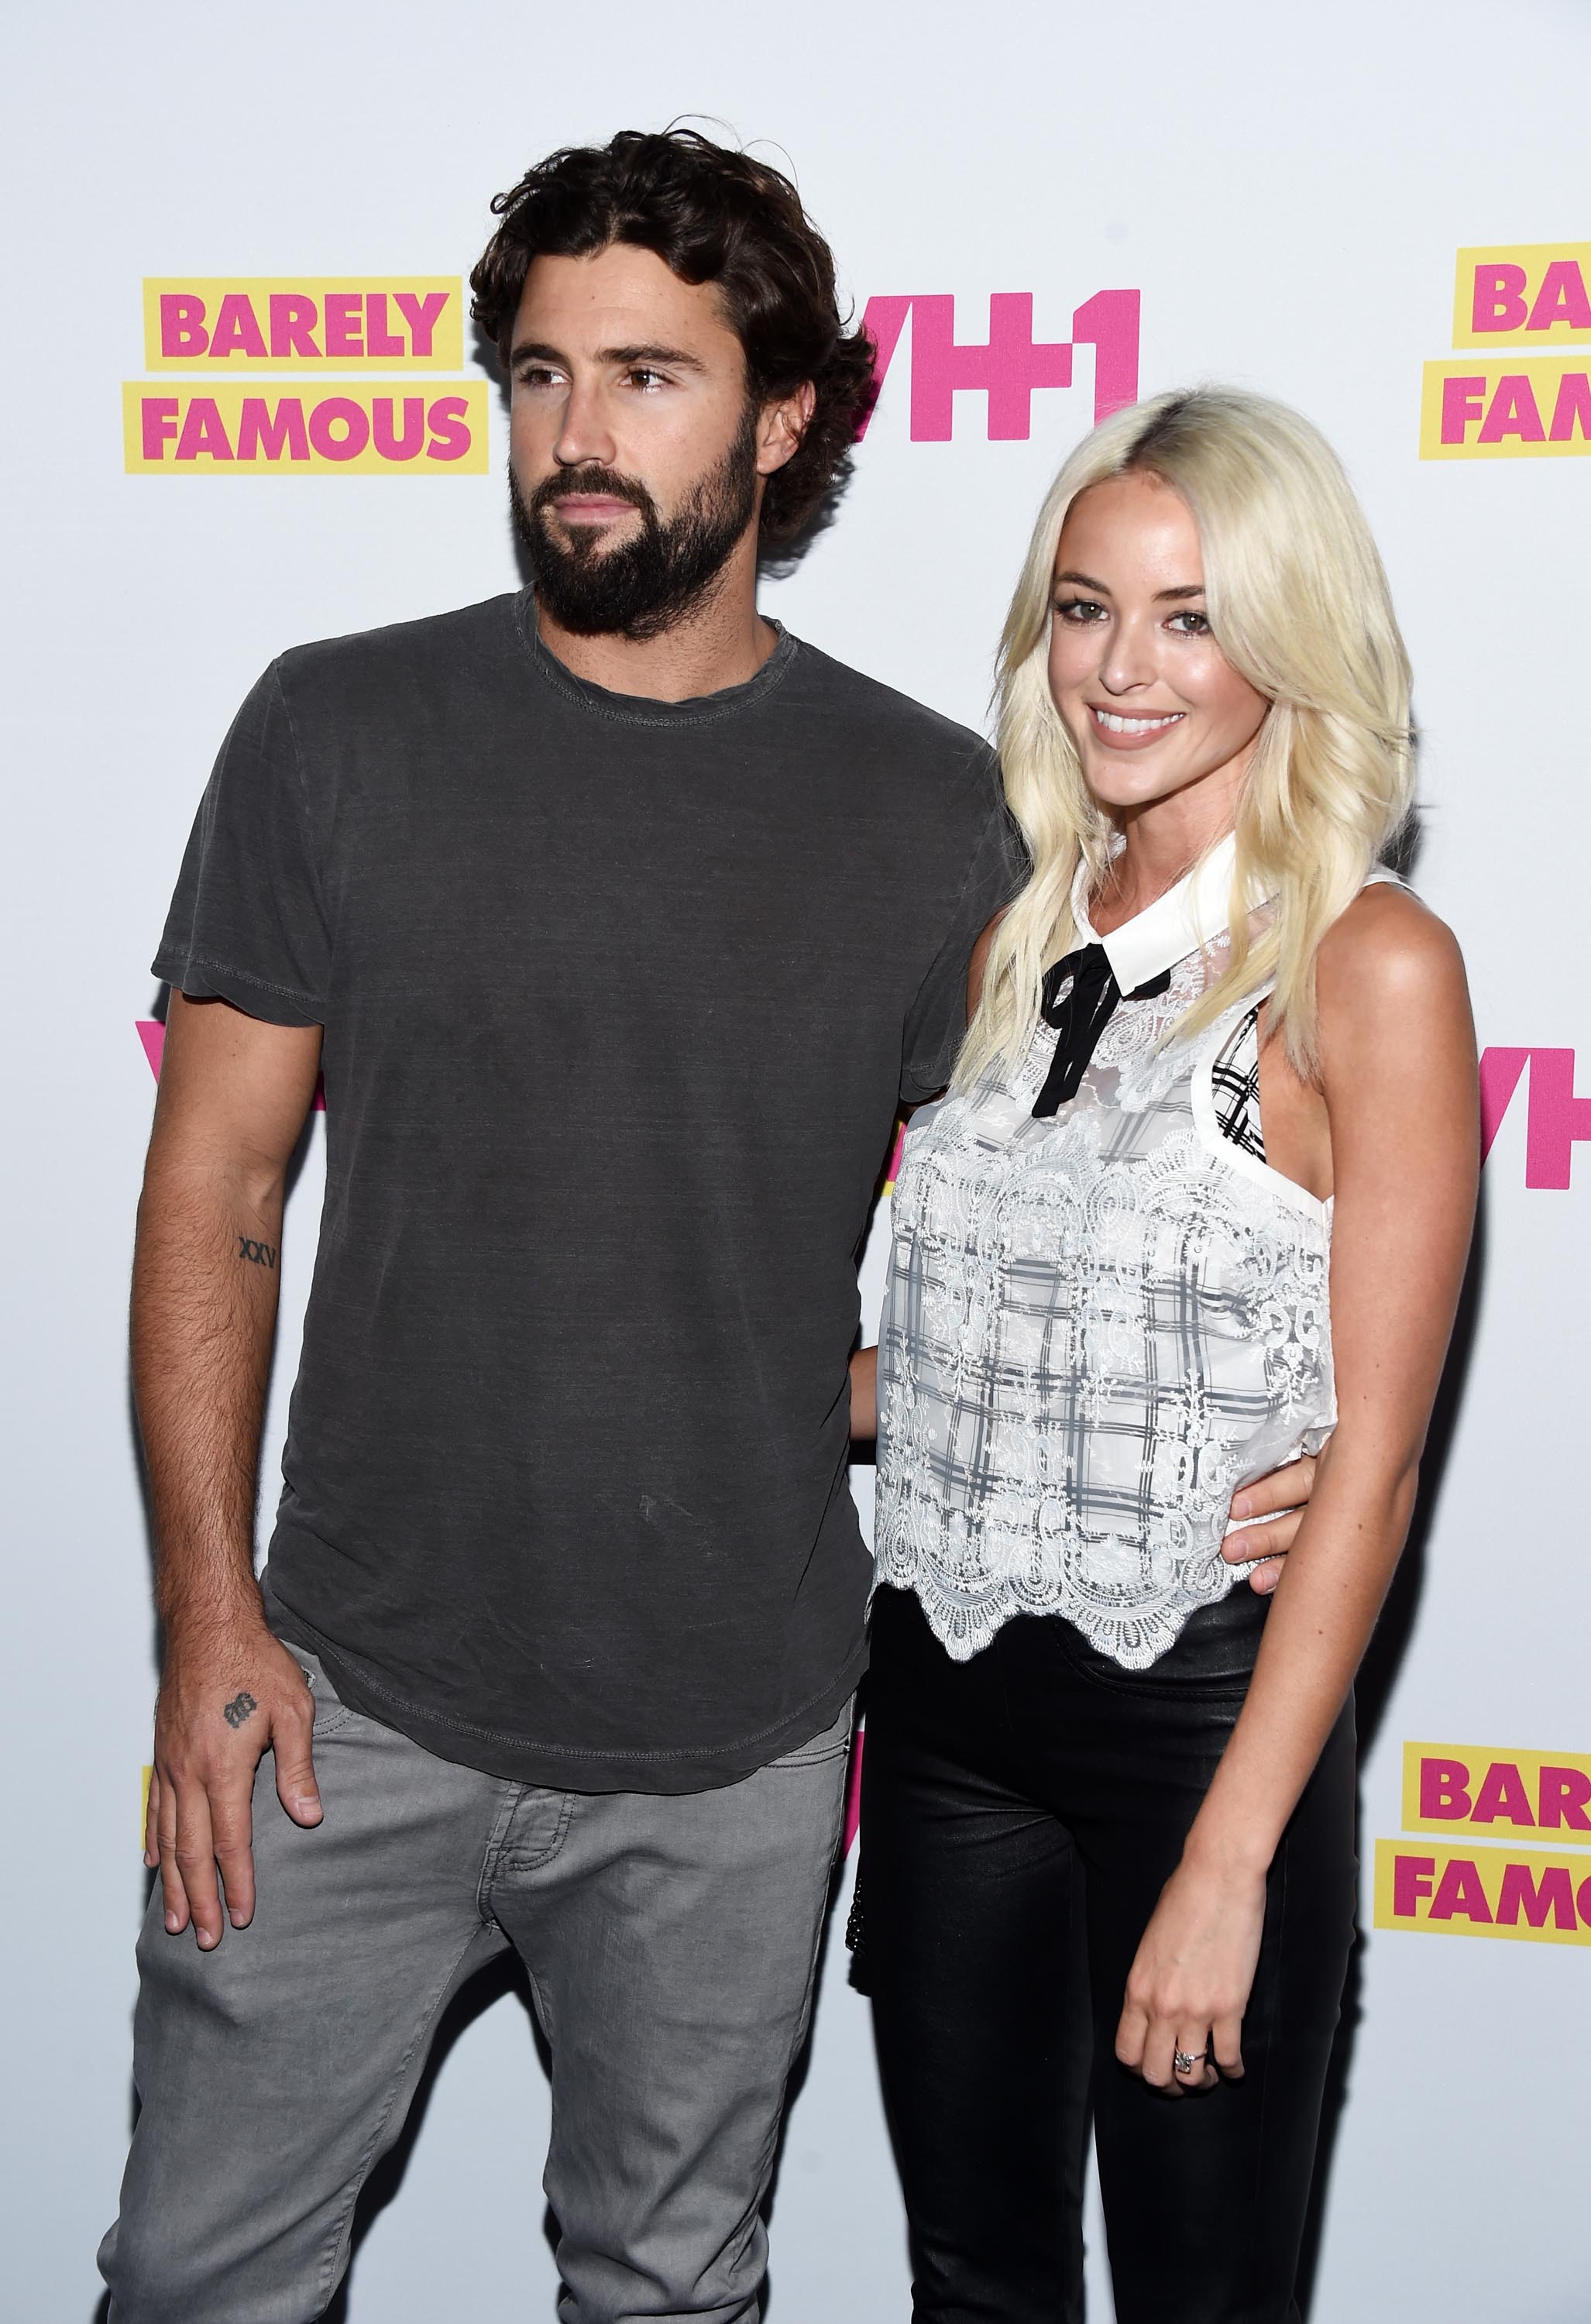 Kaitlynn Carter attend VH1’s ‘Barely Famous’ Season 2 Party